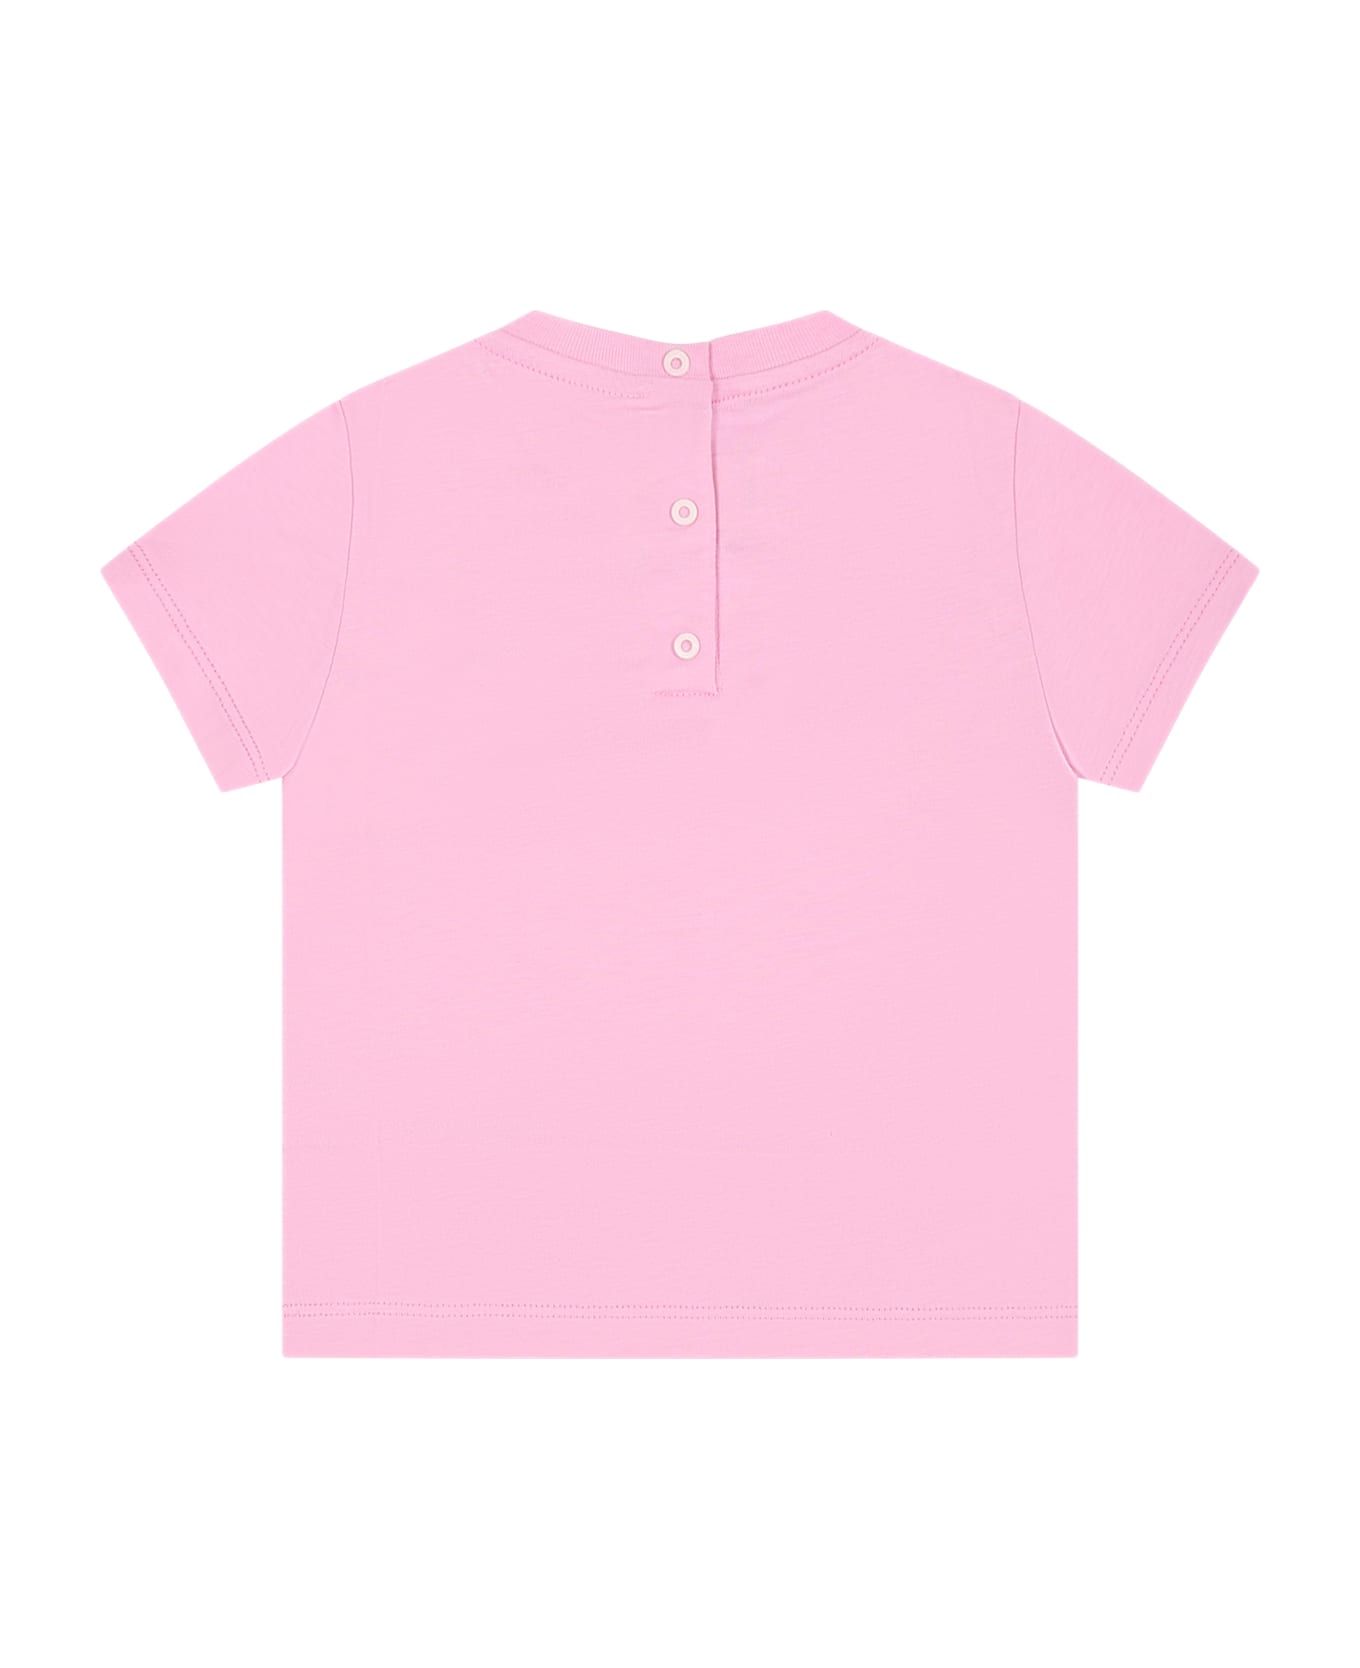 Fendi Pink T-shirt For Girl With Teddy Bear - Pink